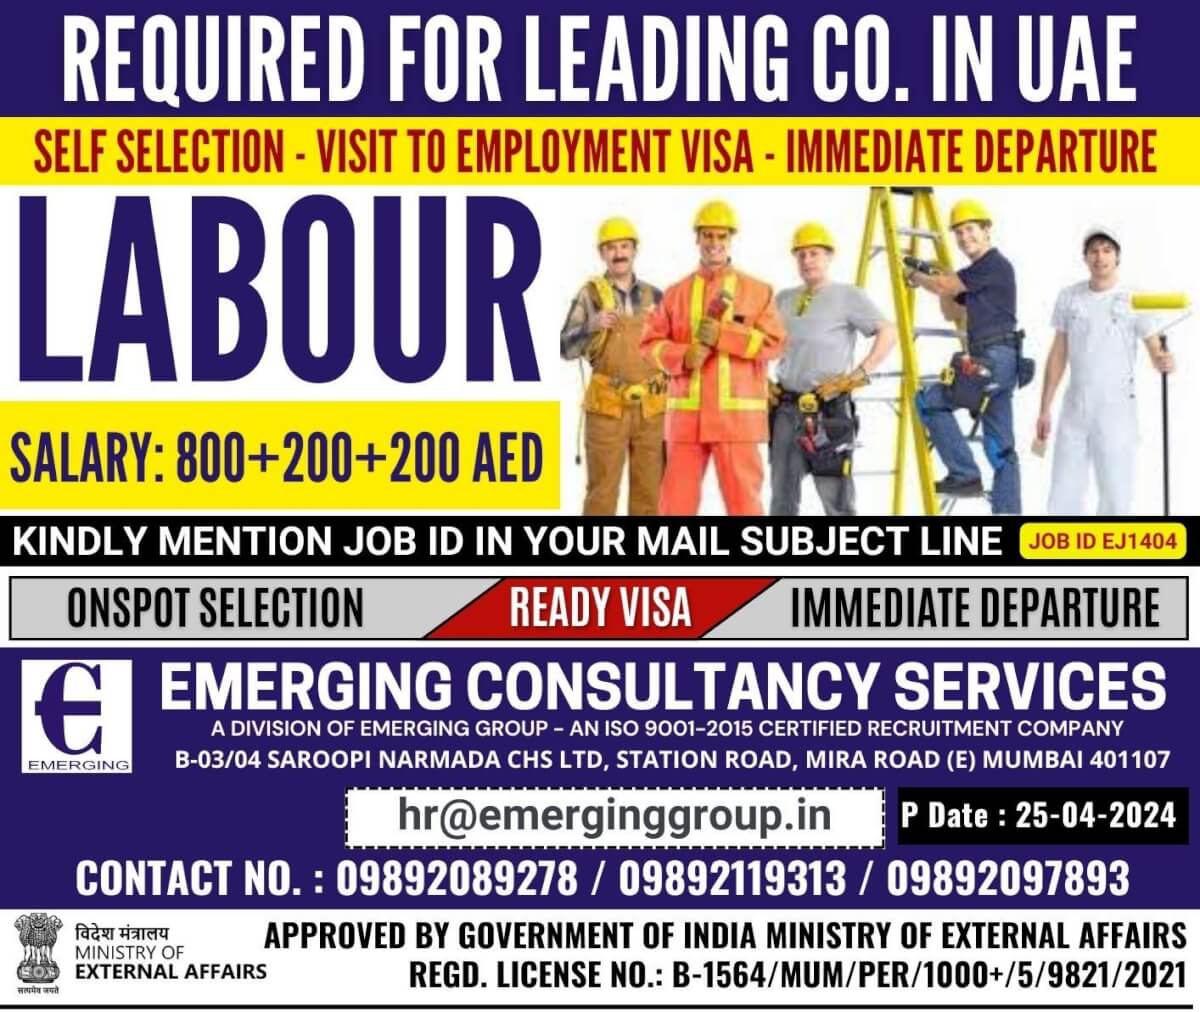 URGENTLY REQUIRED LABOUR FOR LEADING COMPANY IN UAE